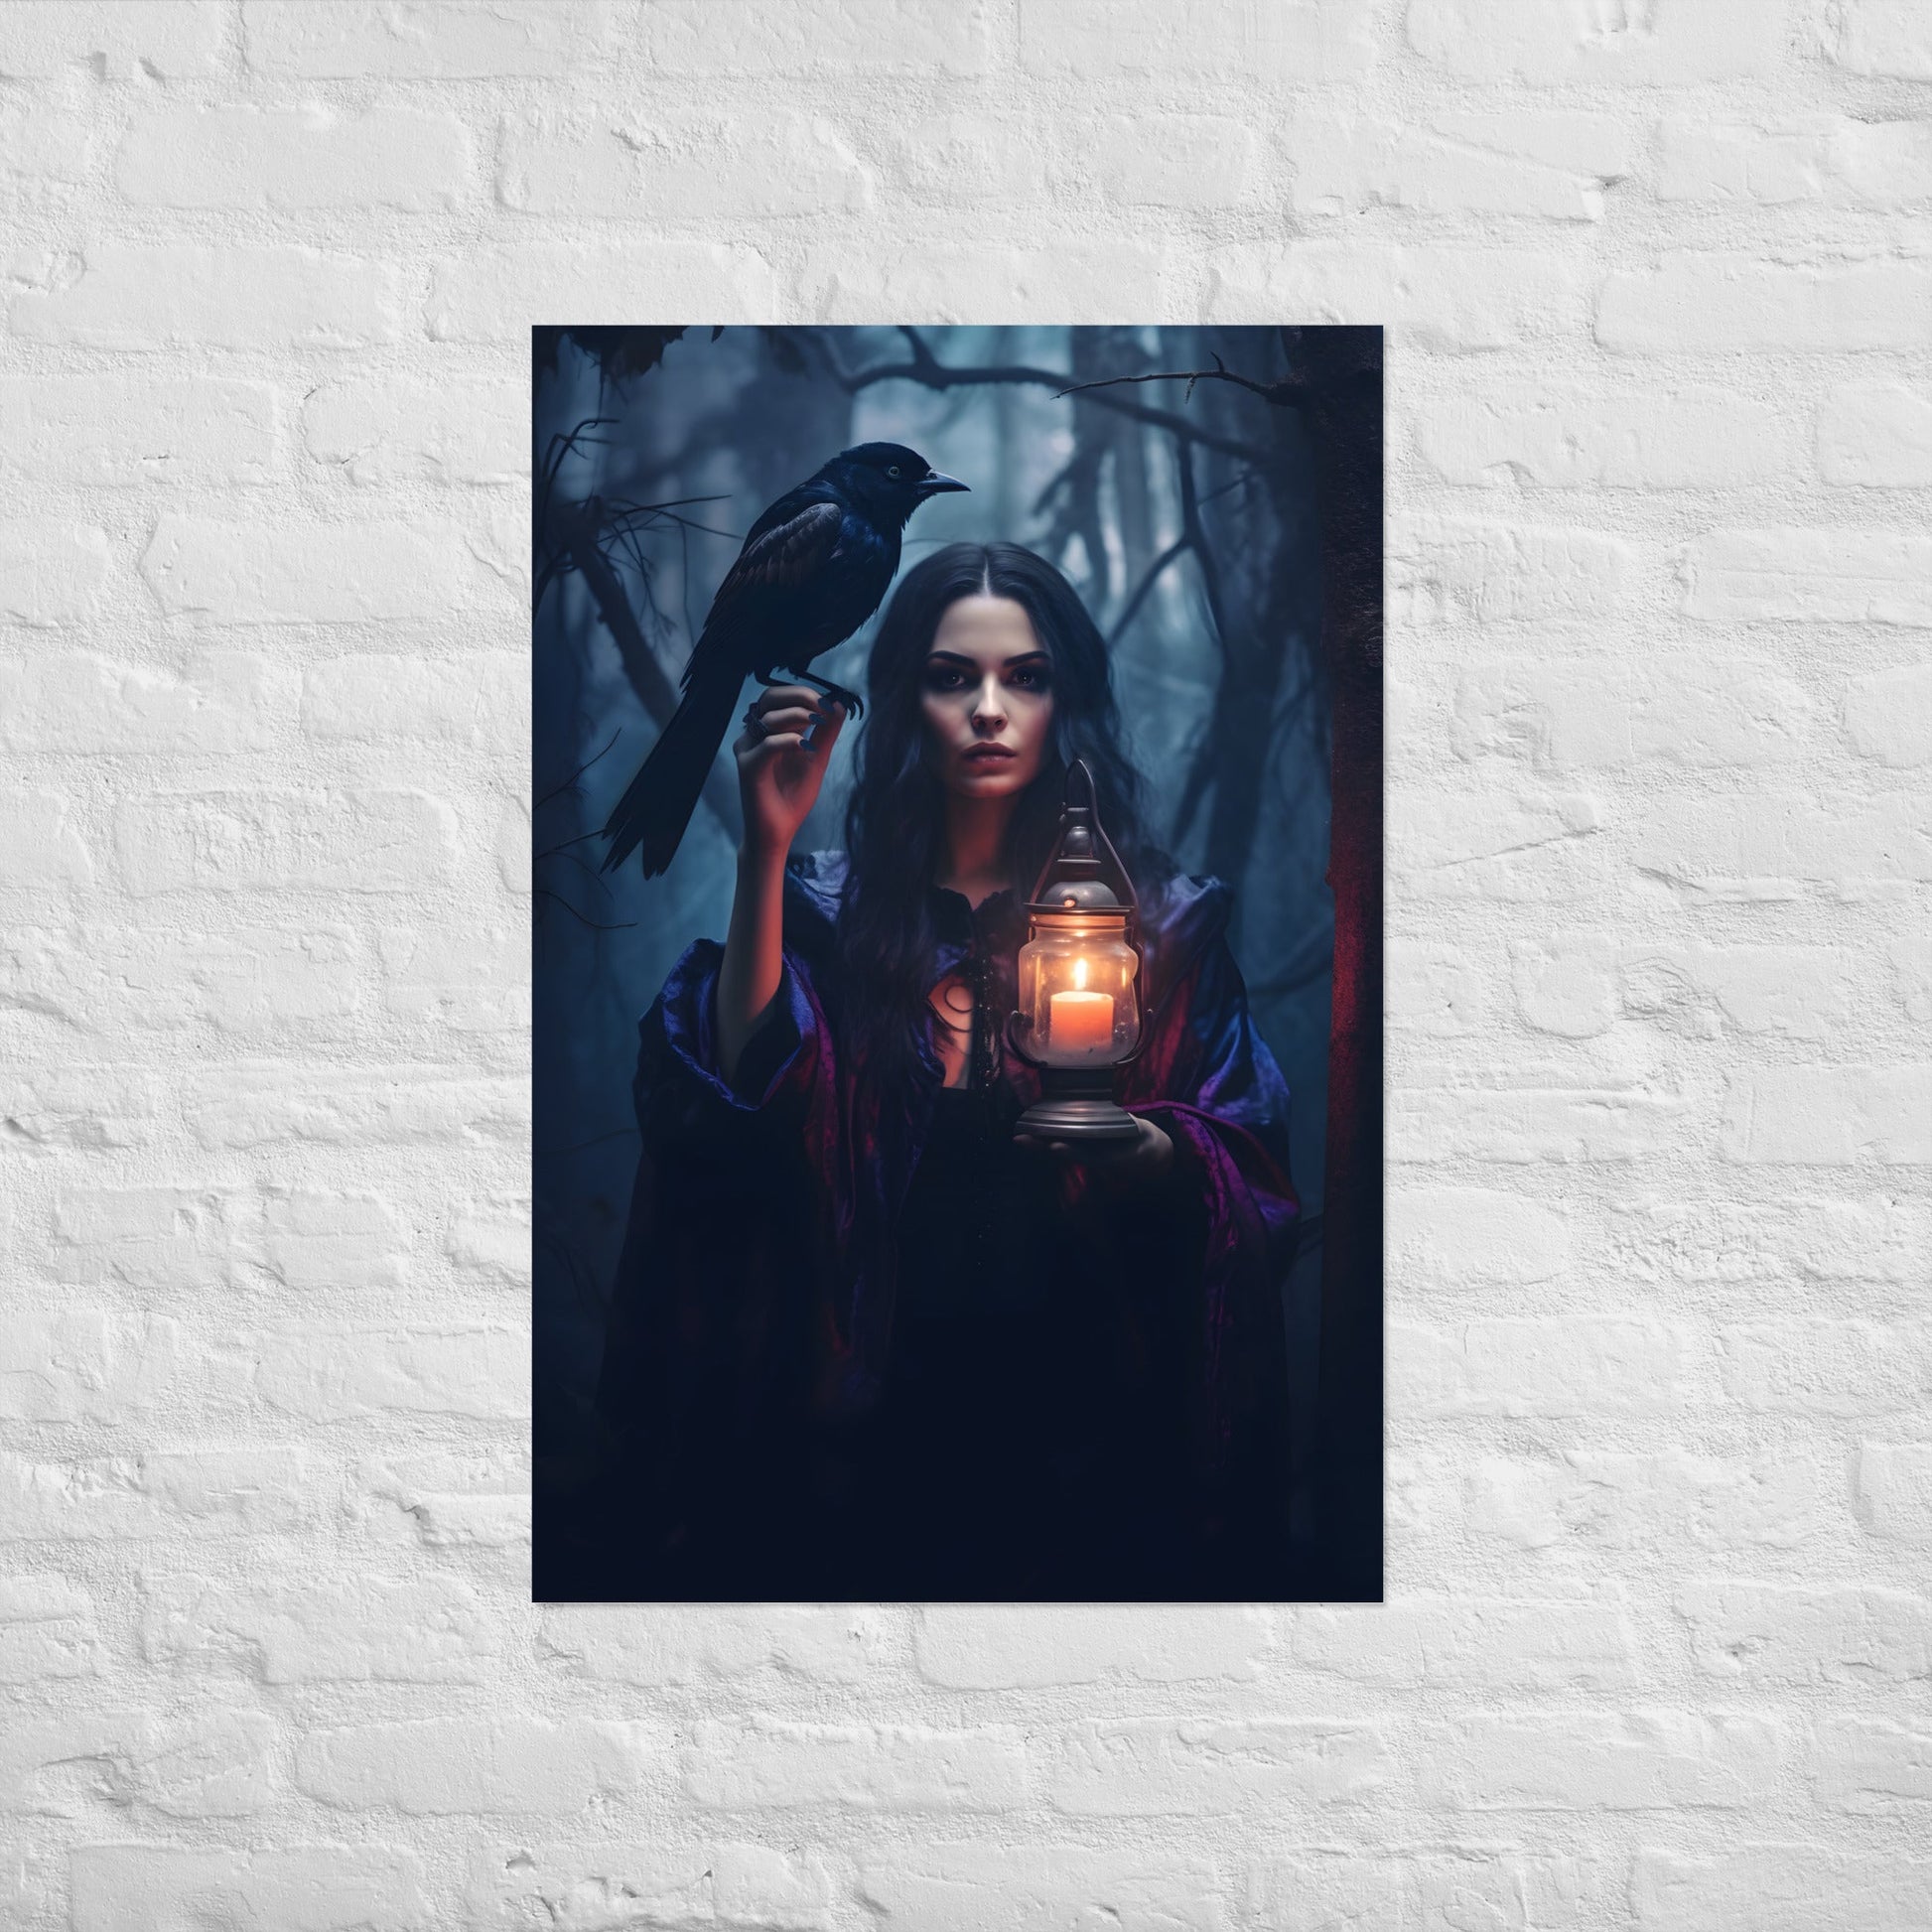 Witch Holding a Crow and a Lantern in Forest PosterHome DecorVTZdesigns24″×36″academiaArt & Wall Decorcrow